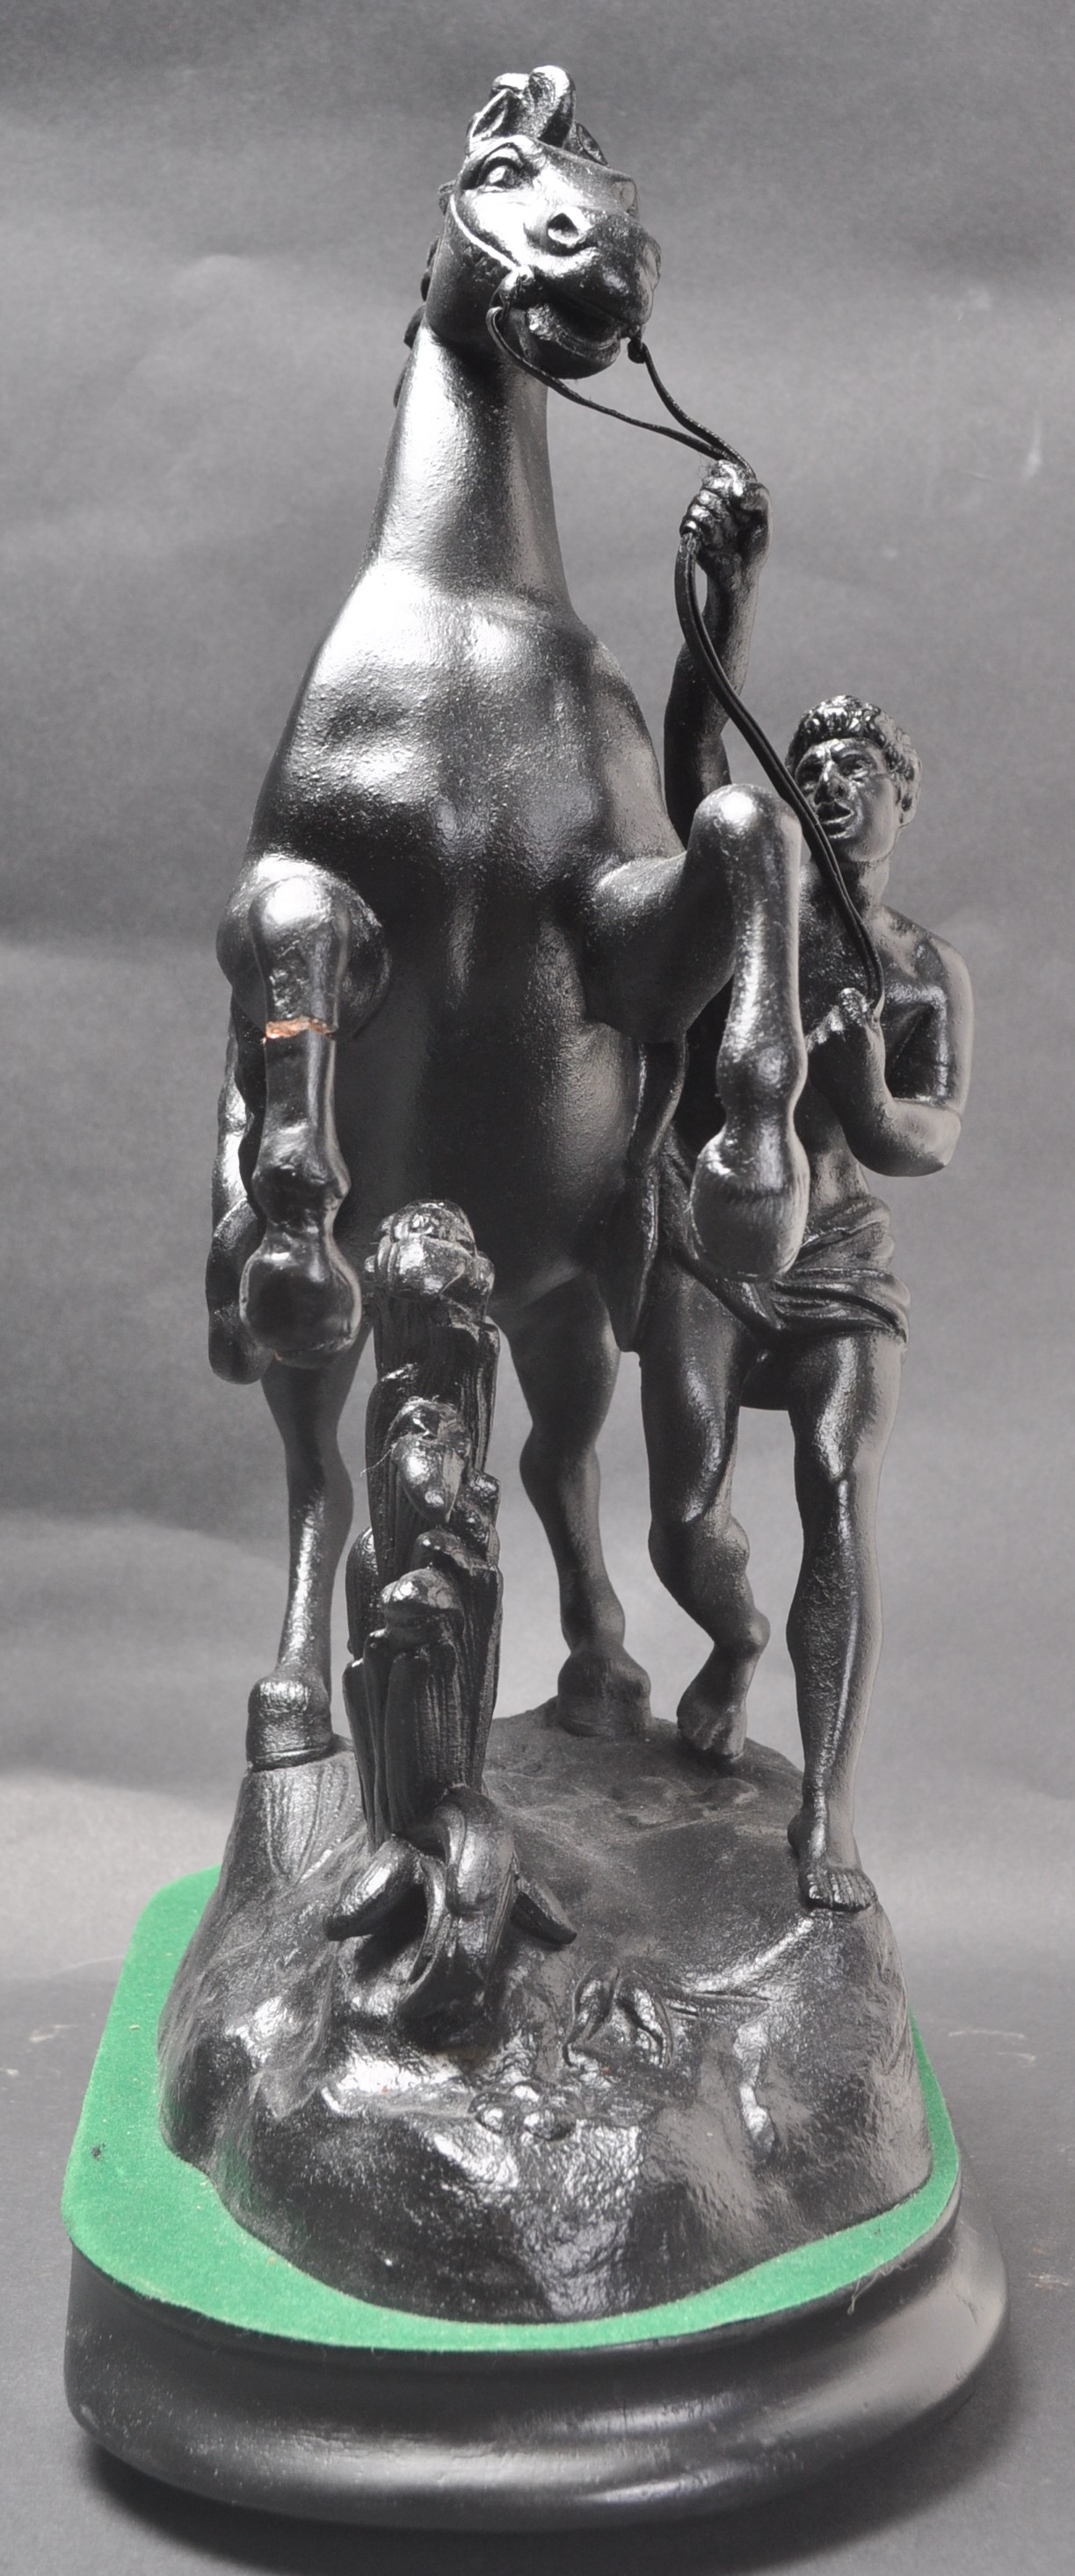 20TH CENTURY VINTAGE SPELTER FIGURINE OF A YOUTH CONTROLLING A REARING HORSE - Image 2 of 8